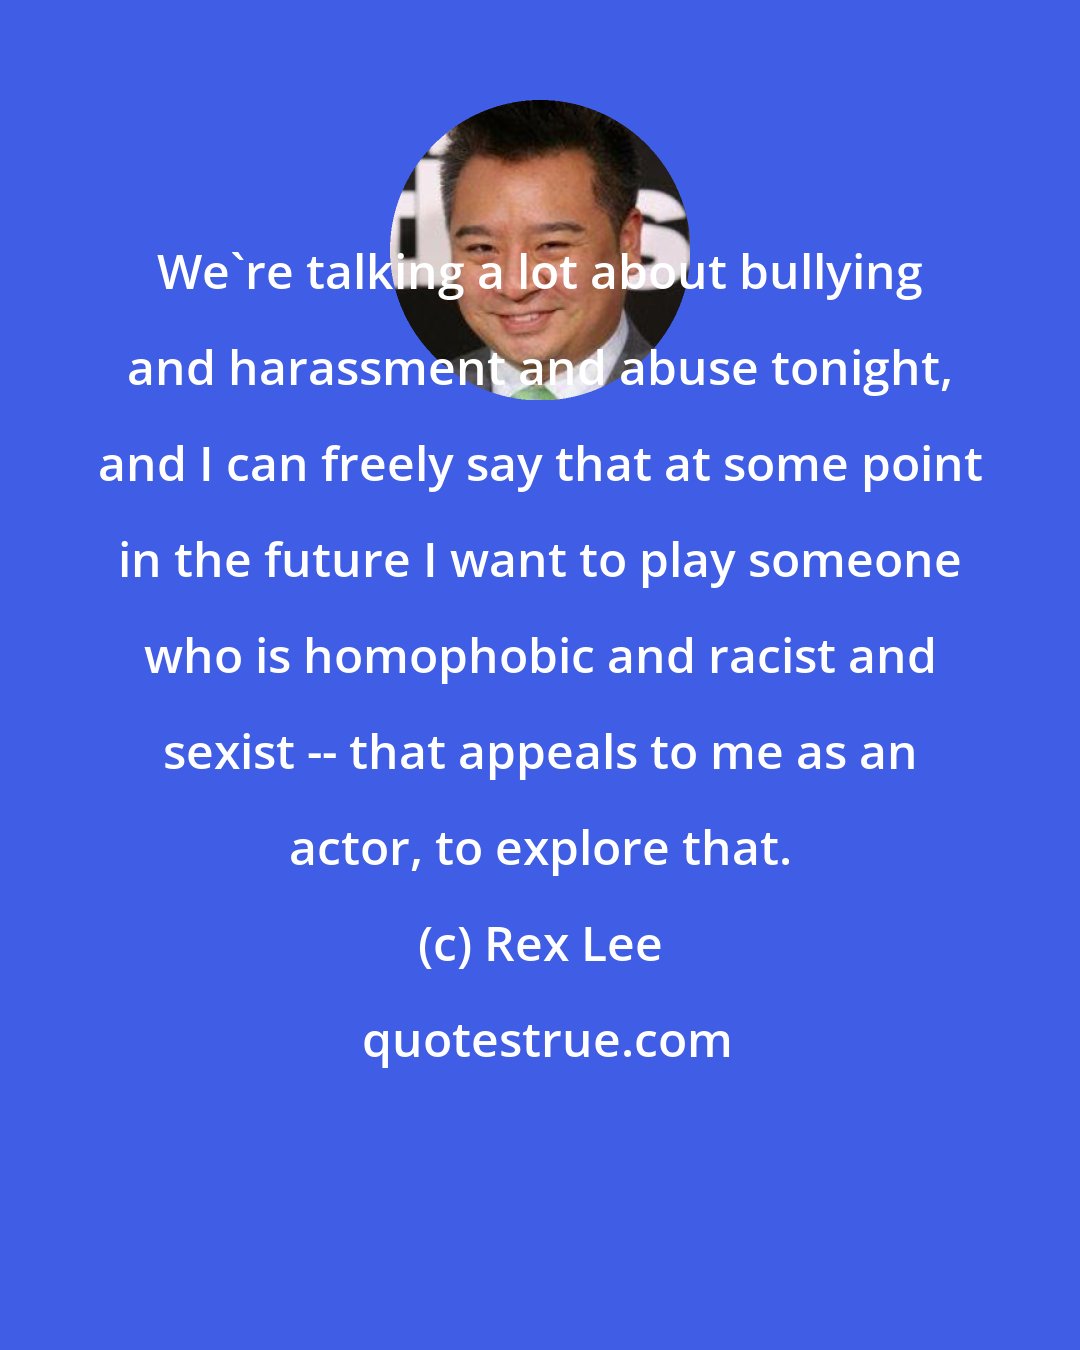 Rex Lee: We're talking a lot about bullying and harassment and abuse tonight, and I can freely say that at some point in the future I want to play someone who is homophobic and racist and sexist -- that appeals to me as an actor, to explore that.